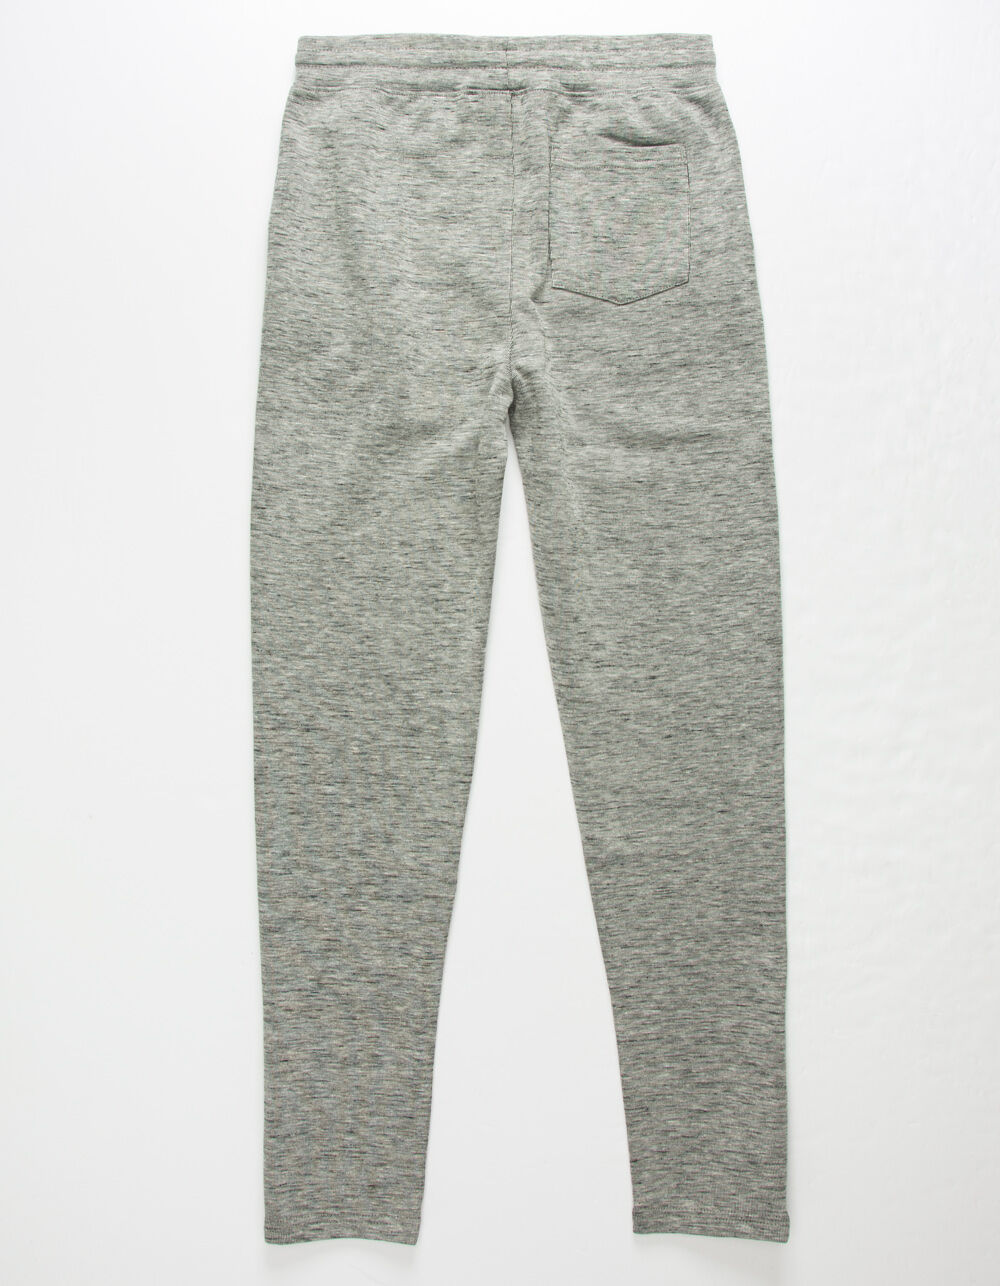 VECTION Mosely Gray Boys Jogger Pants - GRAY | Tillys